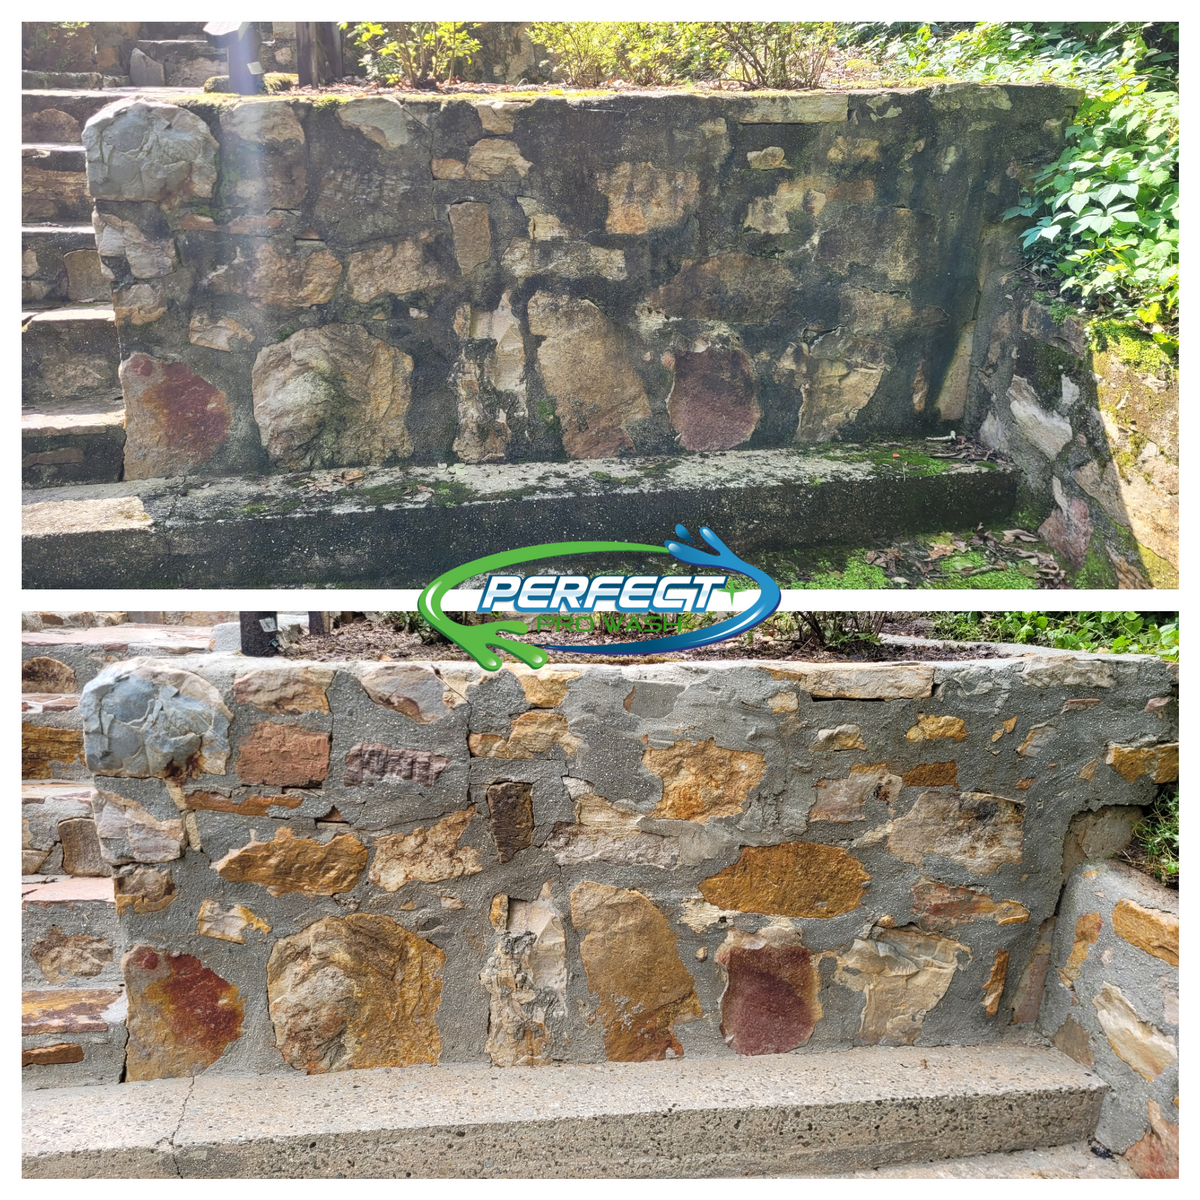 Hardscape Cleaning for Perfect Pro Wash in Anniston, AL